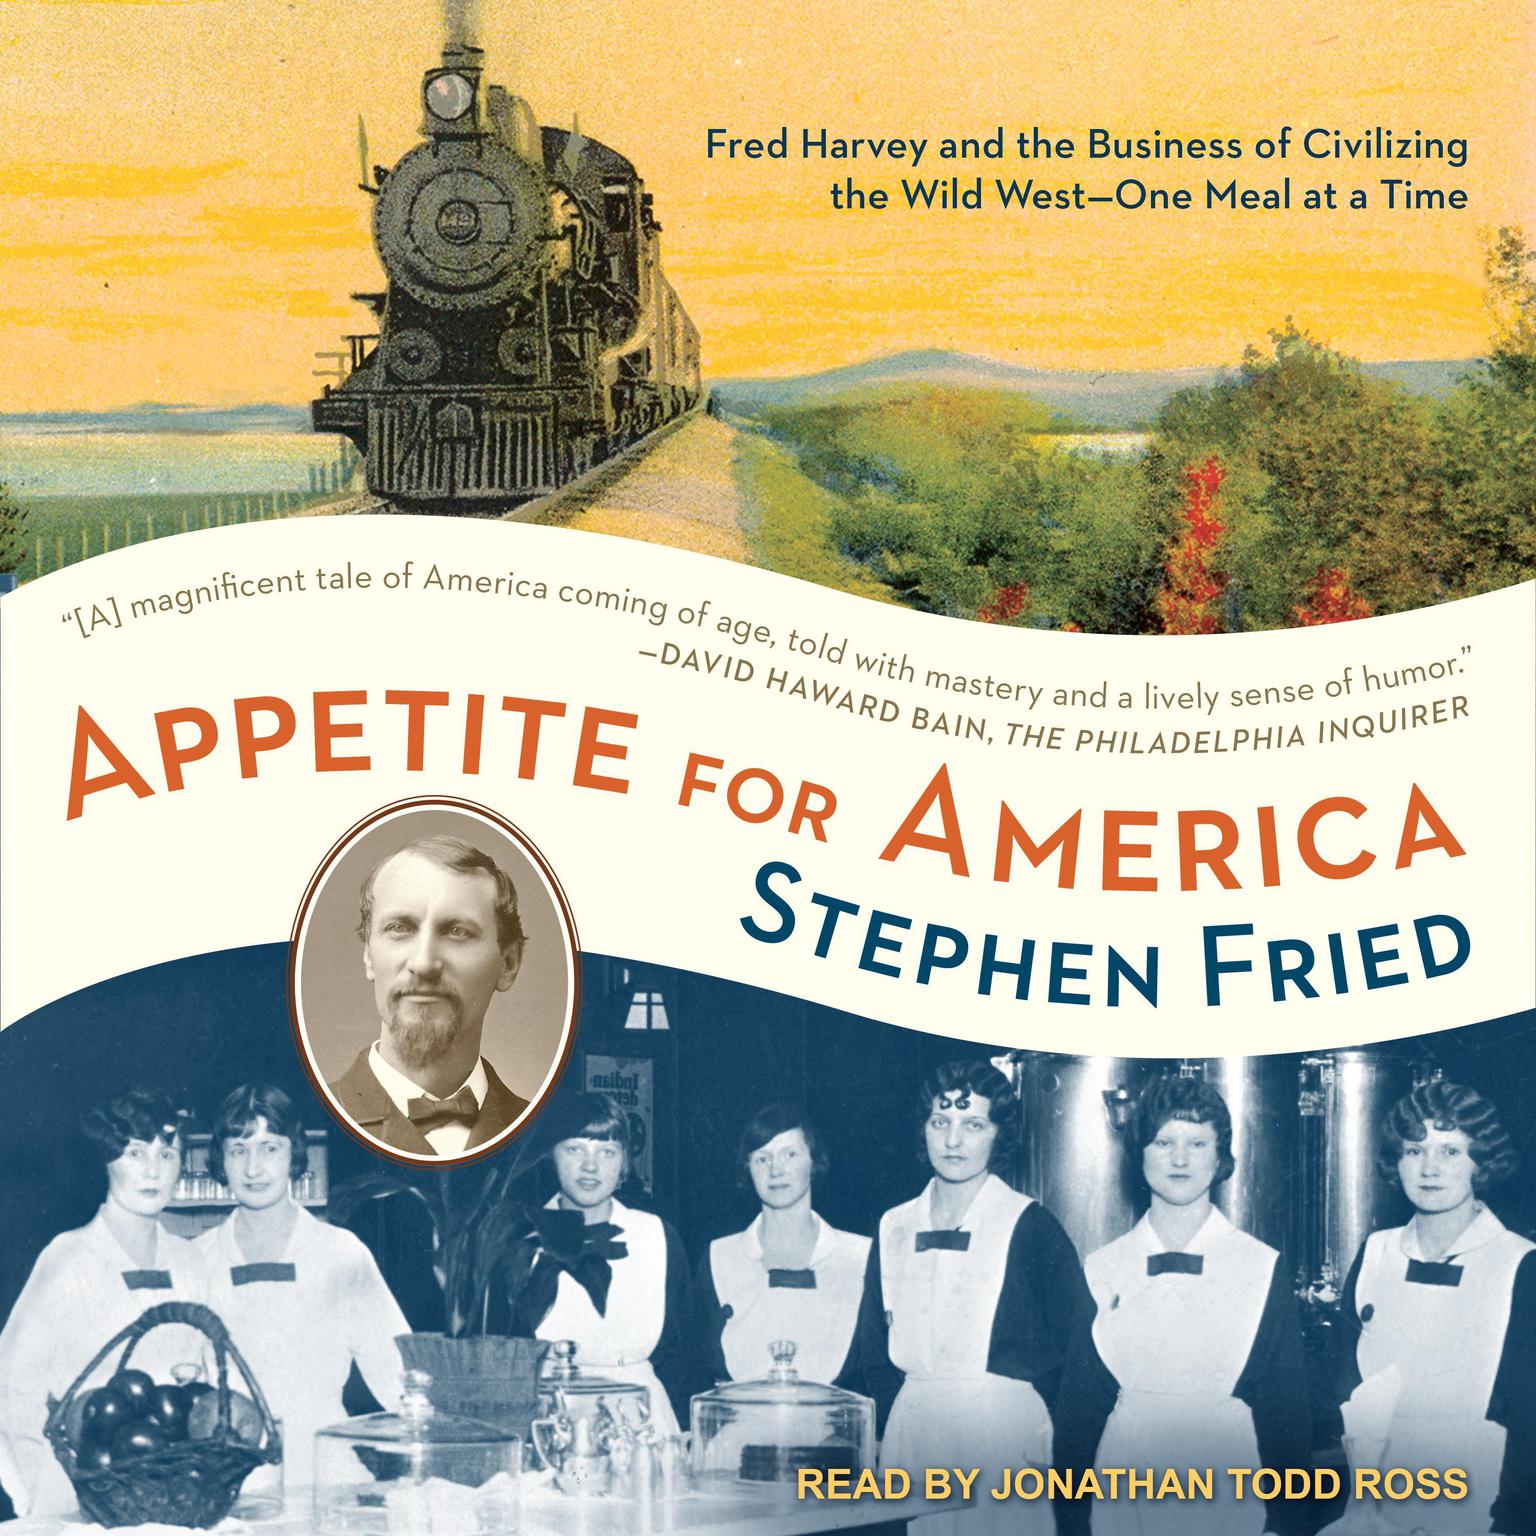 Appetite for America: Fred Harvey and the Business of Civilizing the Wild West - One Meal at a Time Audiobook, by Stephen Fried